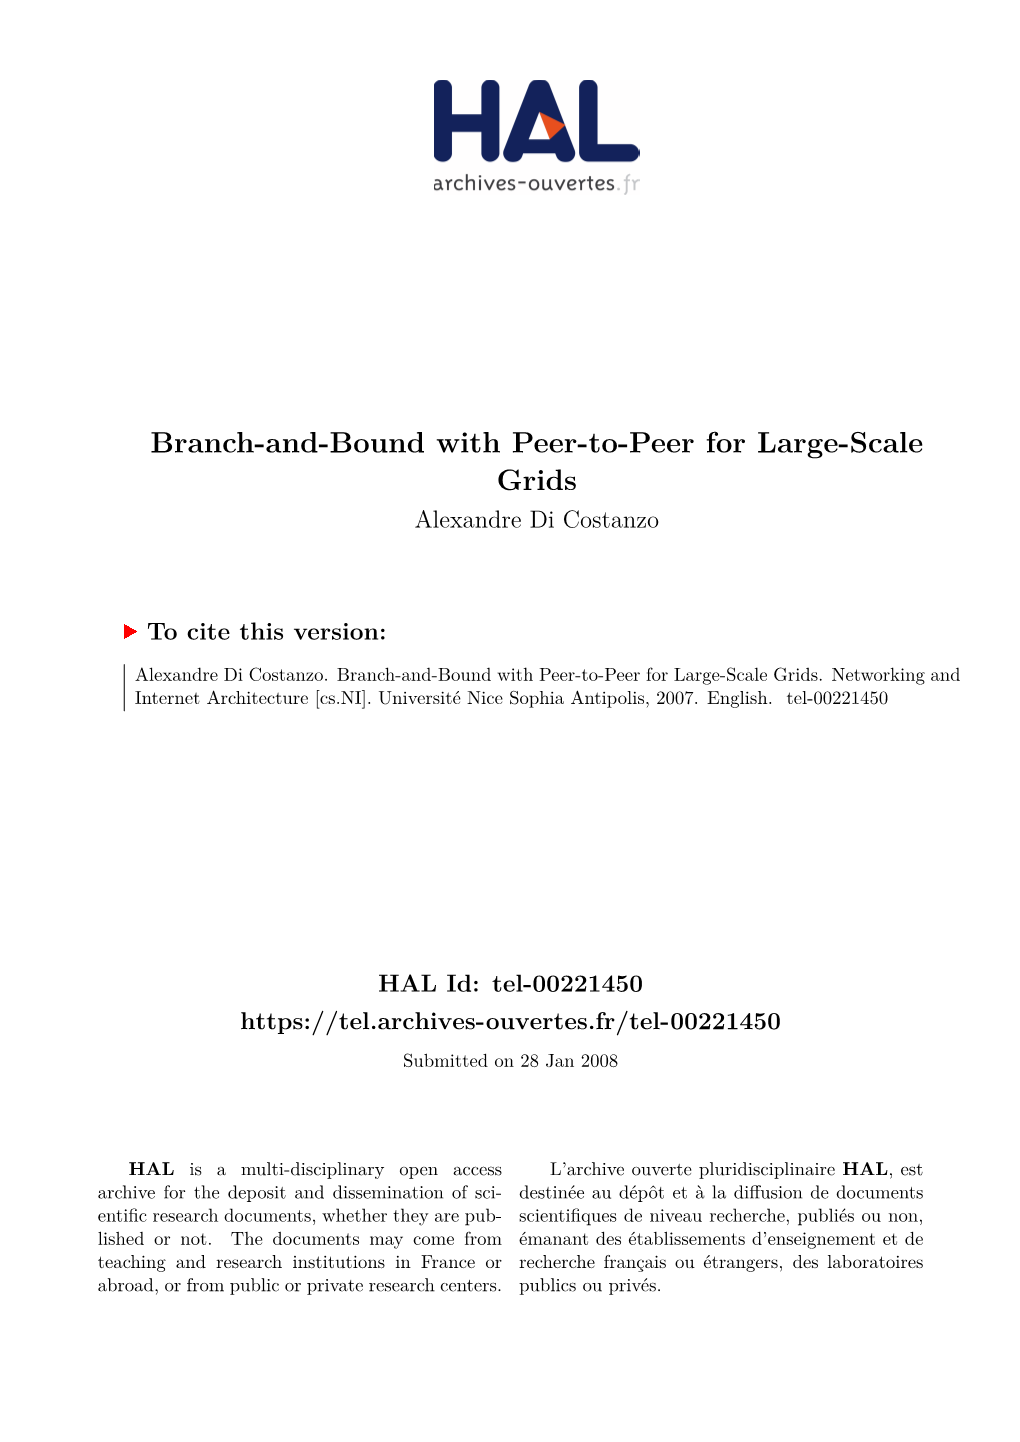 Branch-And-Bound with Peer-To-Peer for Large-Scale Grids Alexandre Di Costanzo